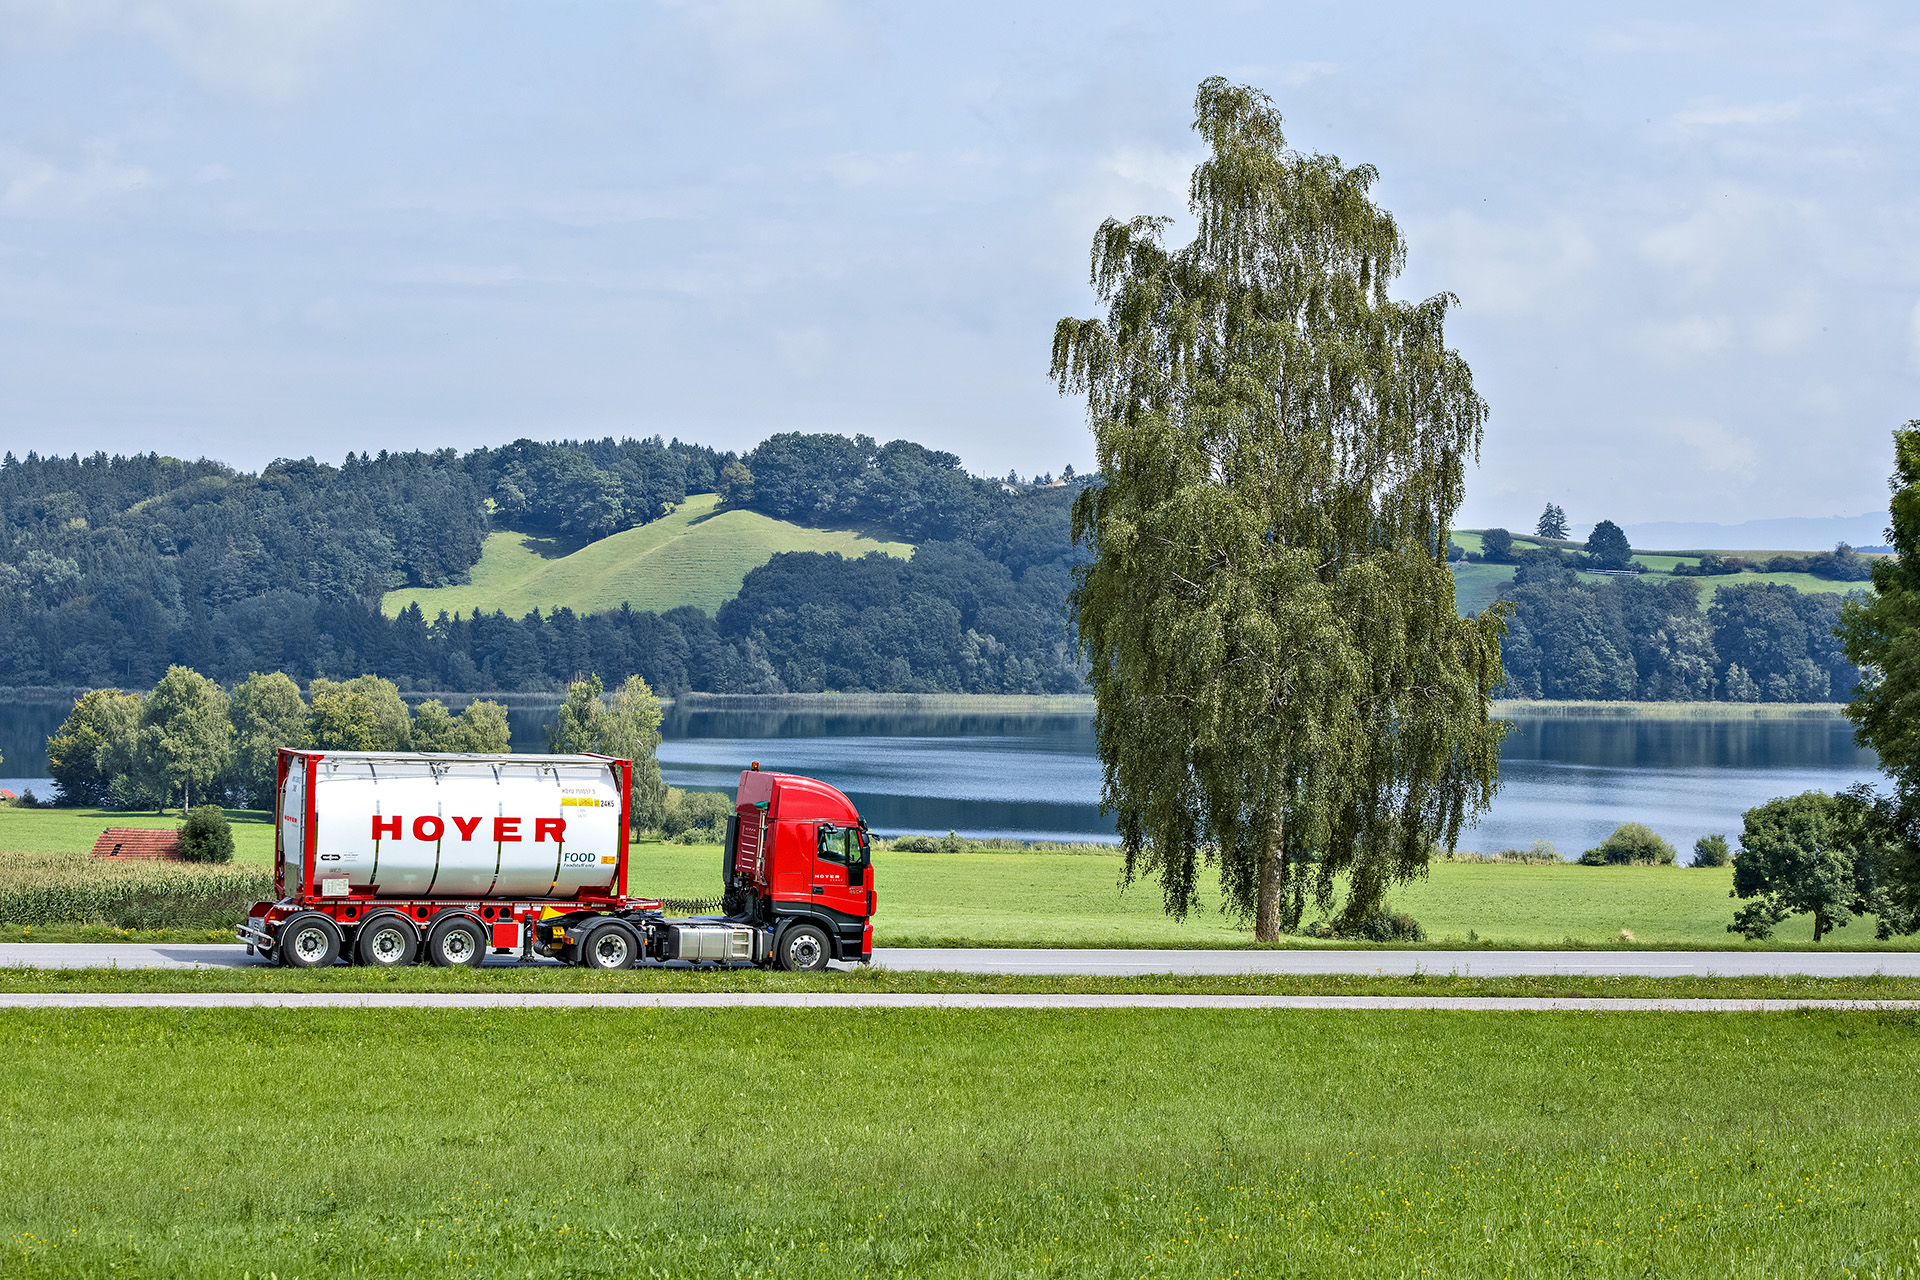 HOYER truck with a foodstuffs tank container on a country road